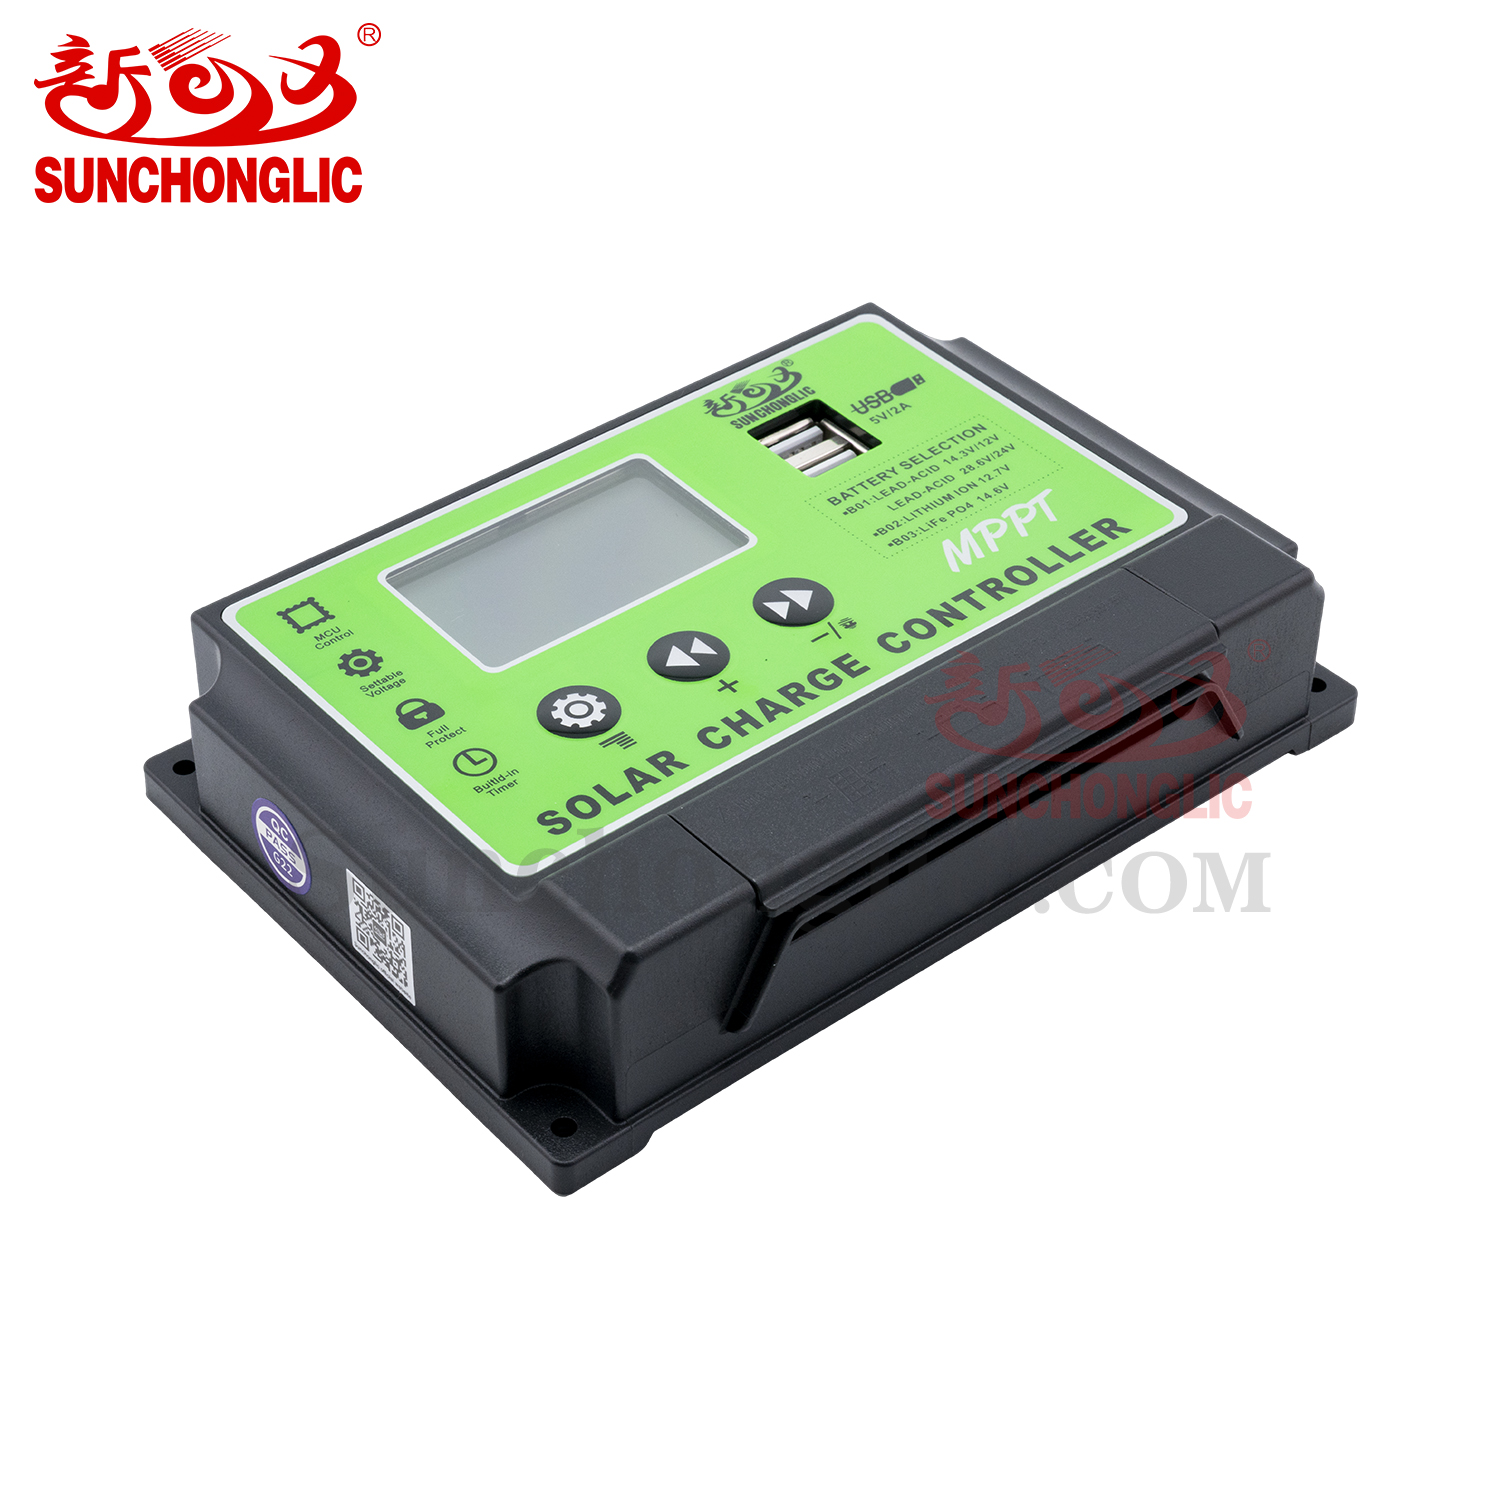 MPPT Solar Charge Controller - FT-M1240